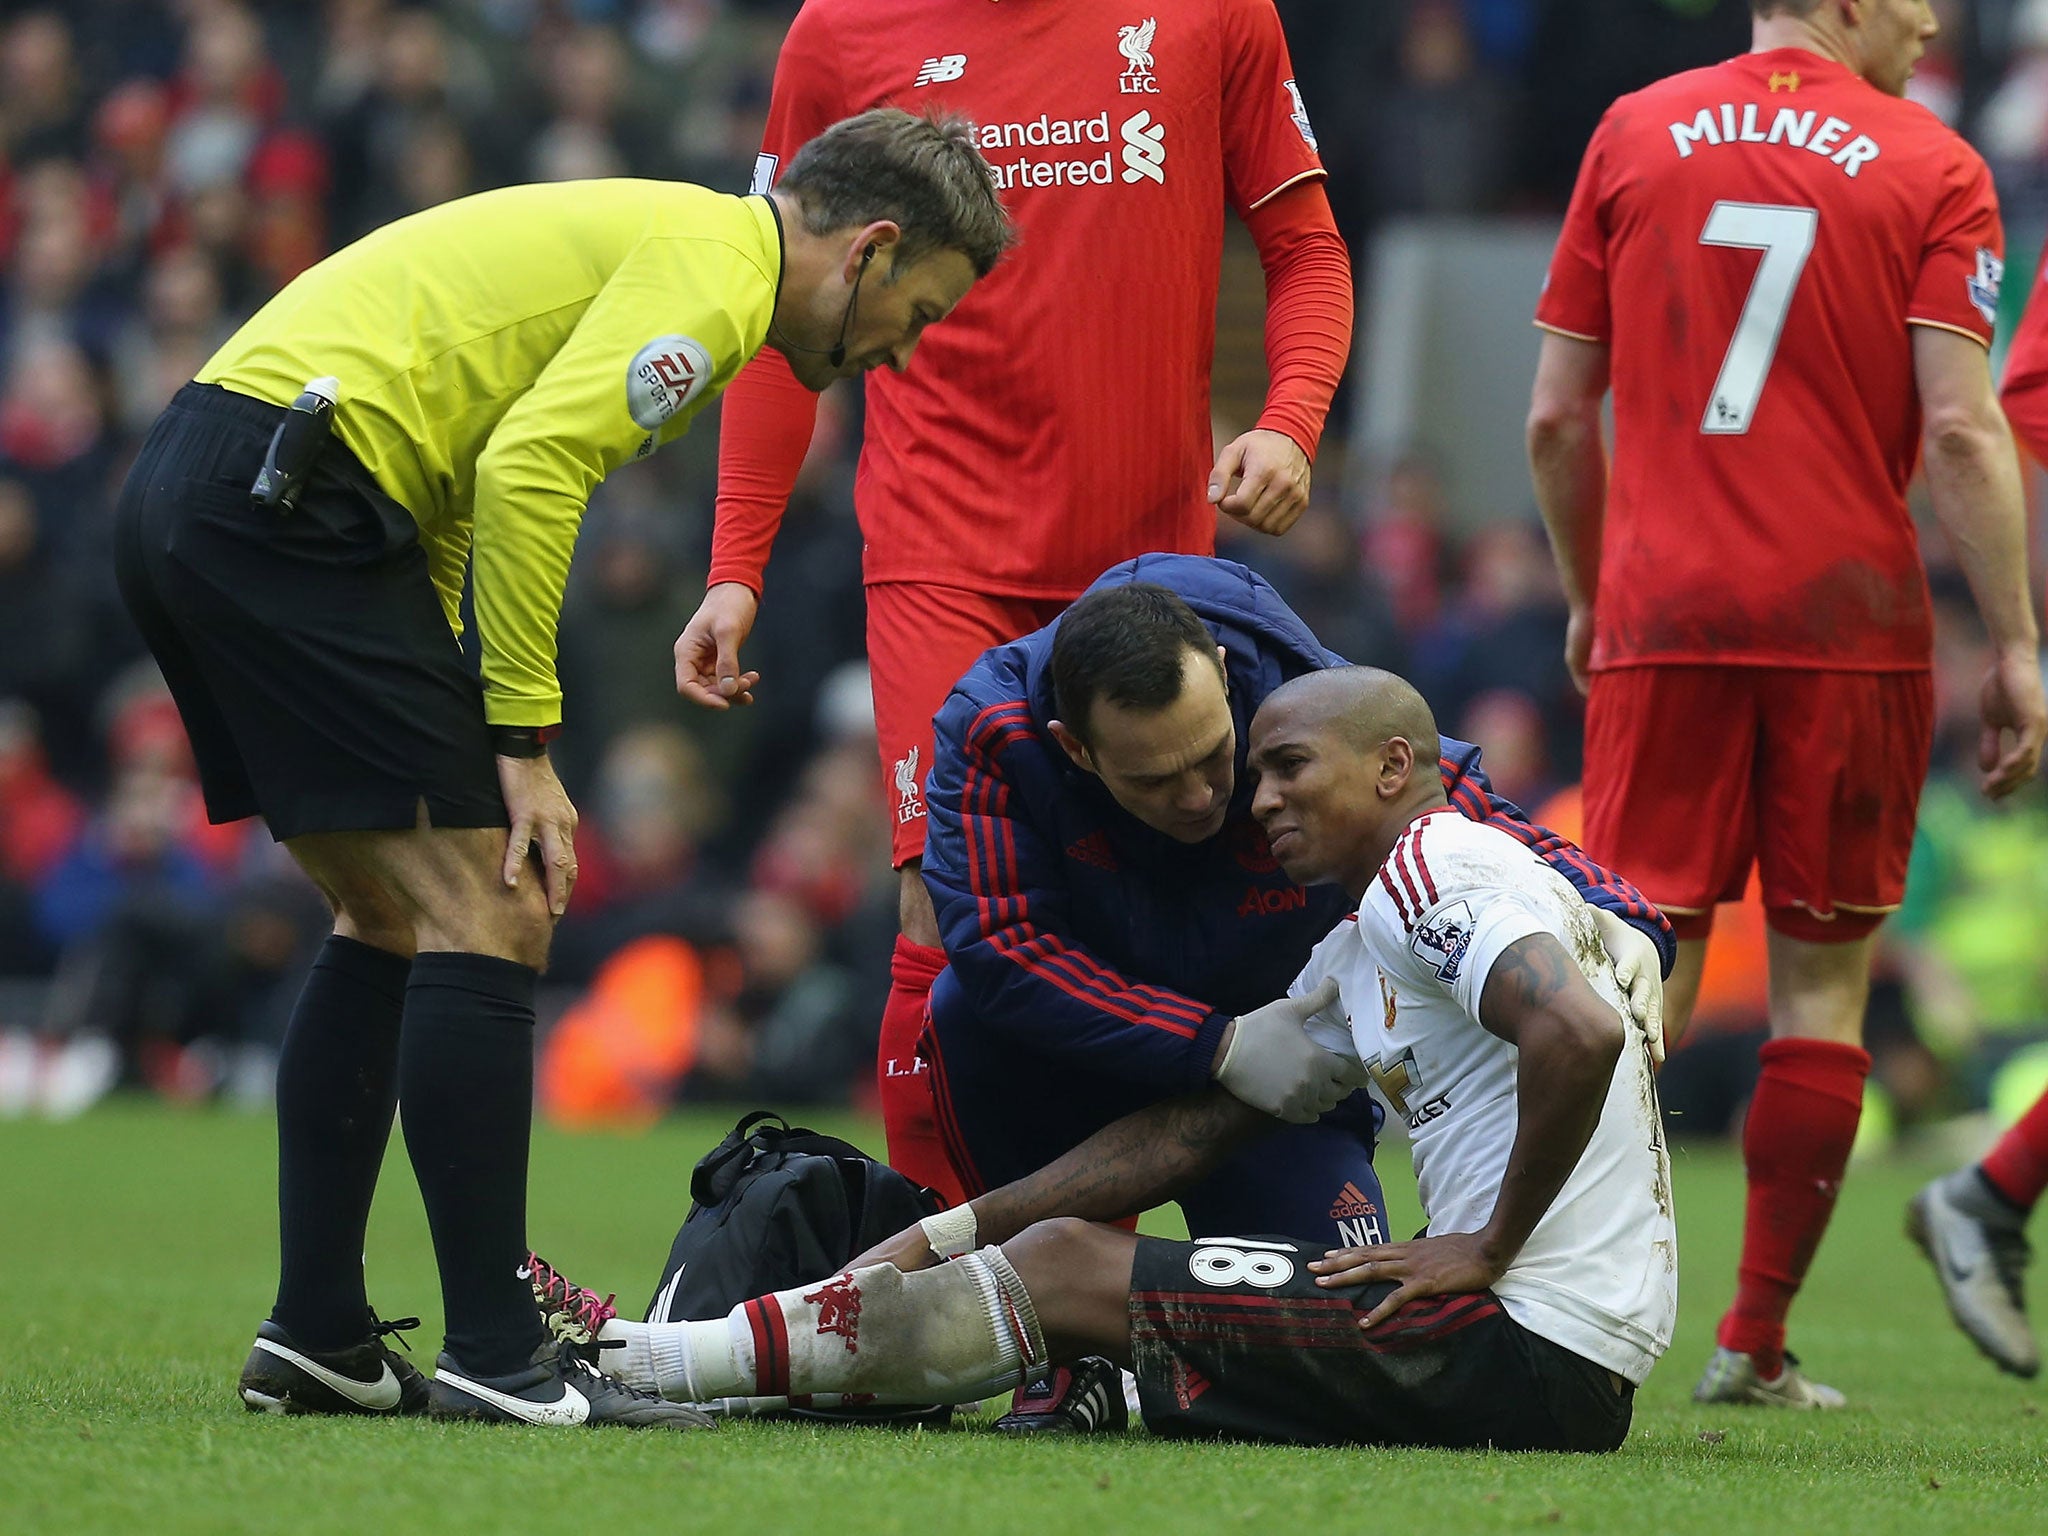 Ashley Young suffered a serious groin injury in the 1-0 win over Liverpool